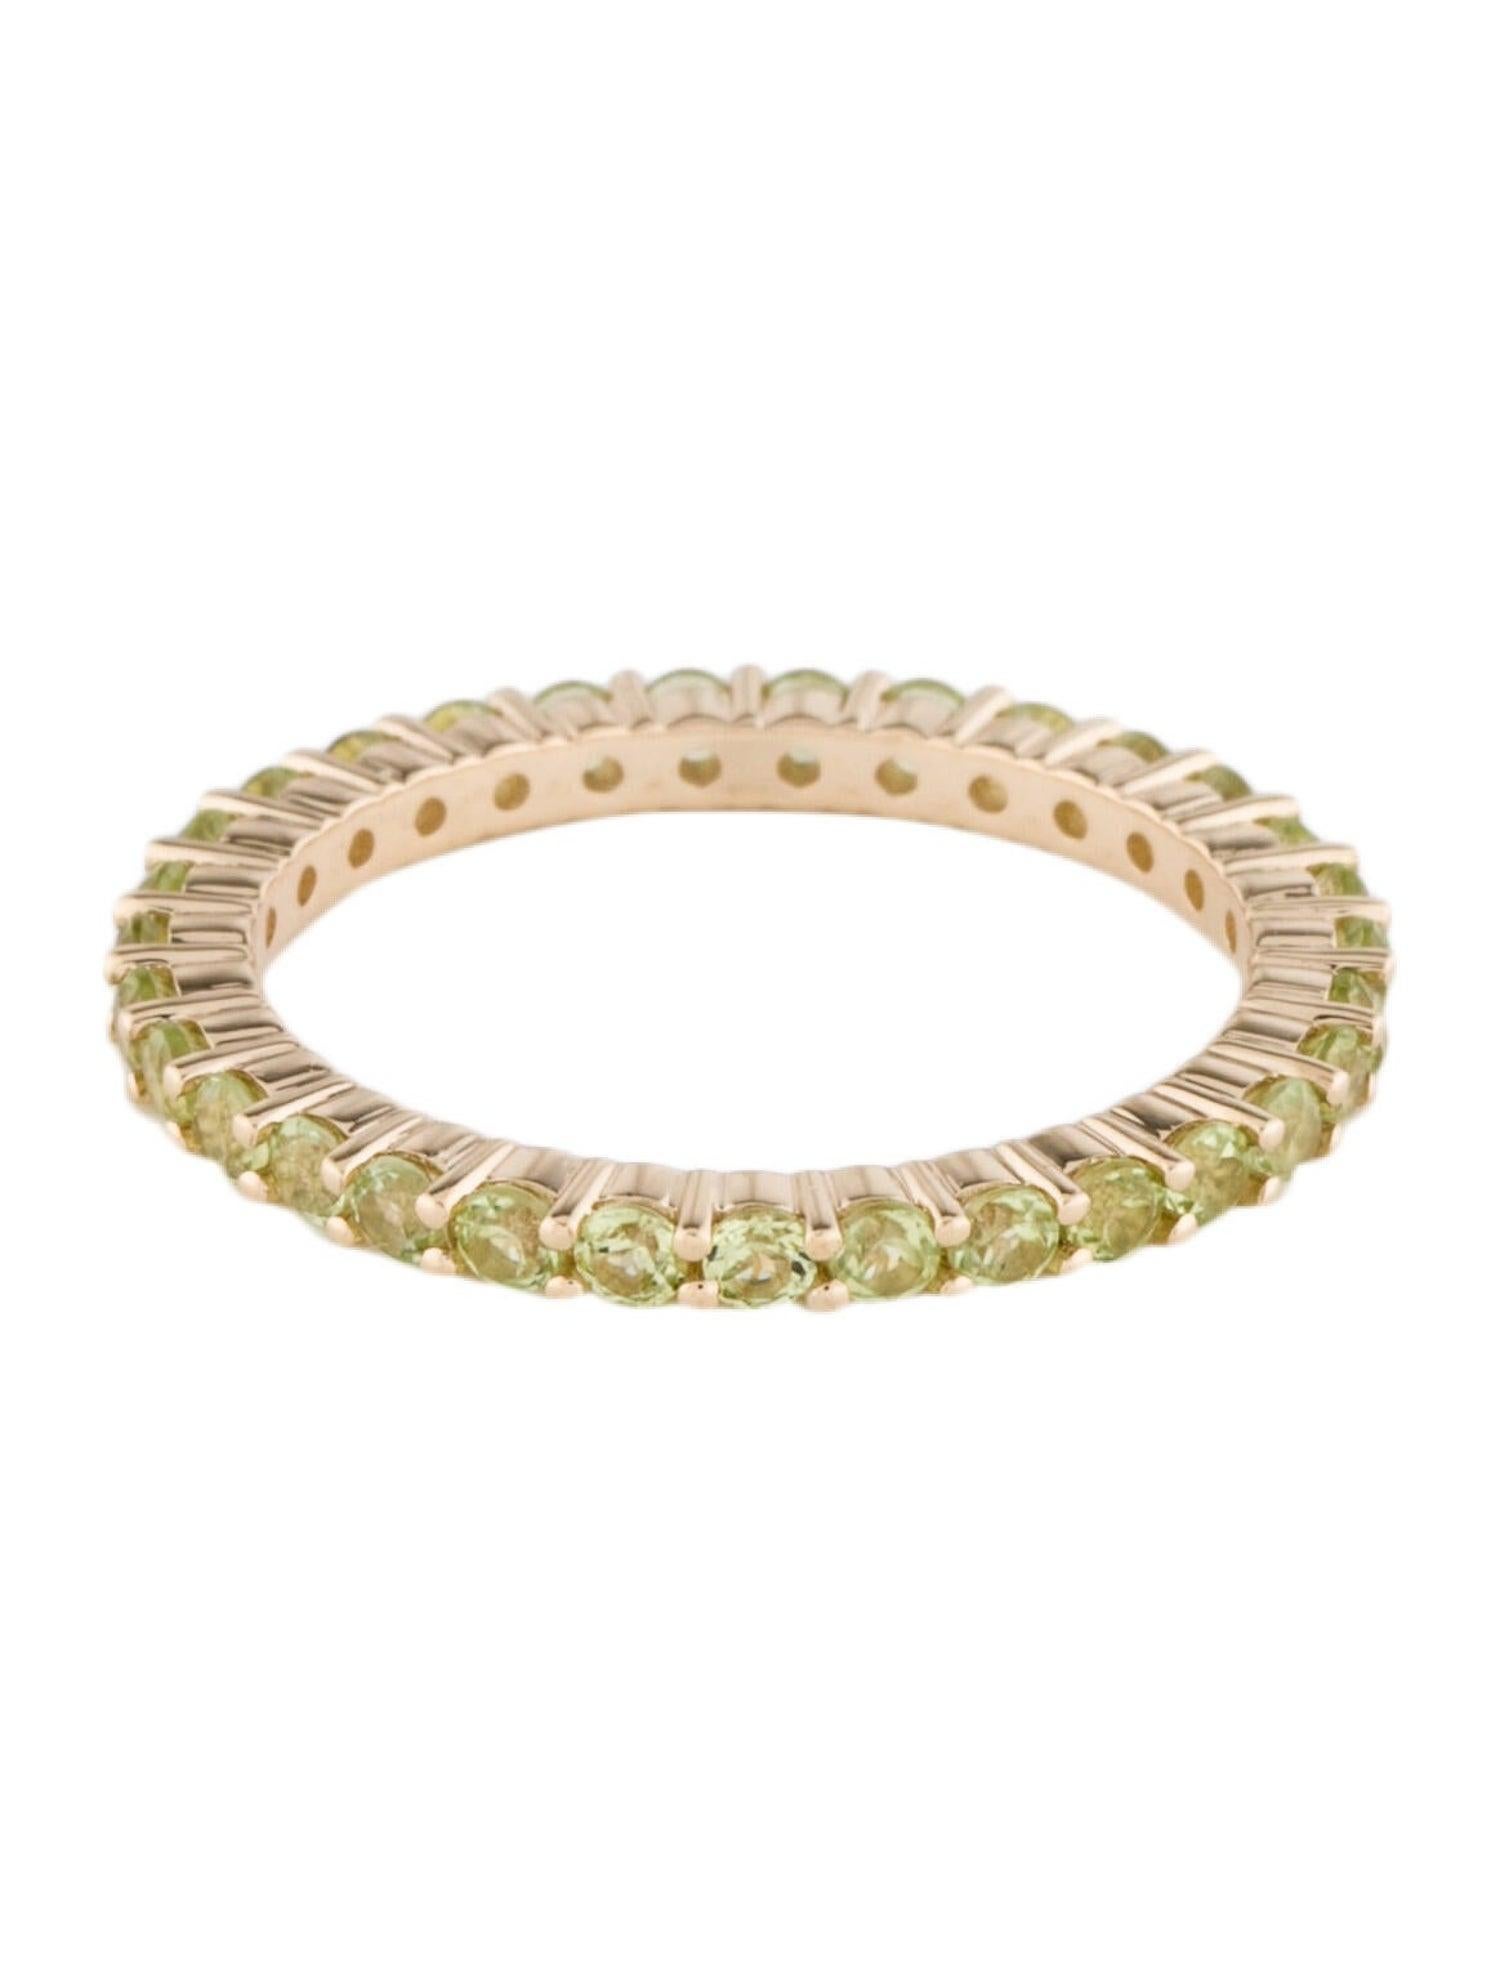 Taille brillant Chic 14K Peridot Eternity Band Ring, Size 7 - Timeless Statement Jewelry Pieces en vente